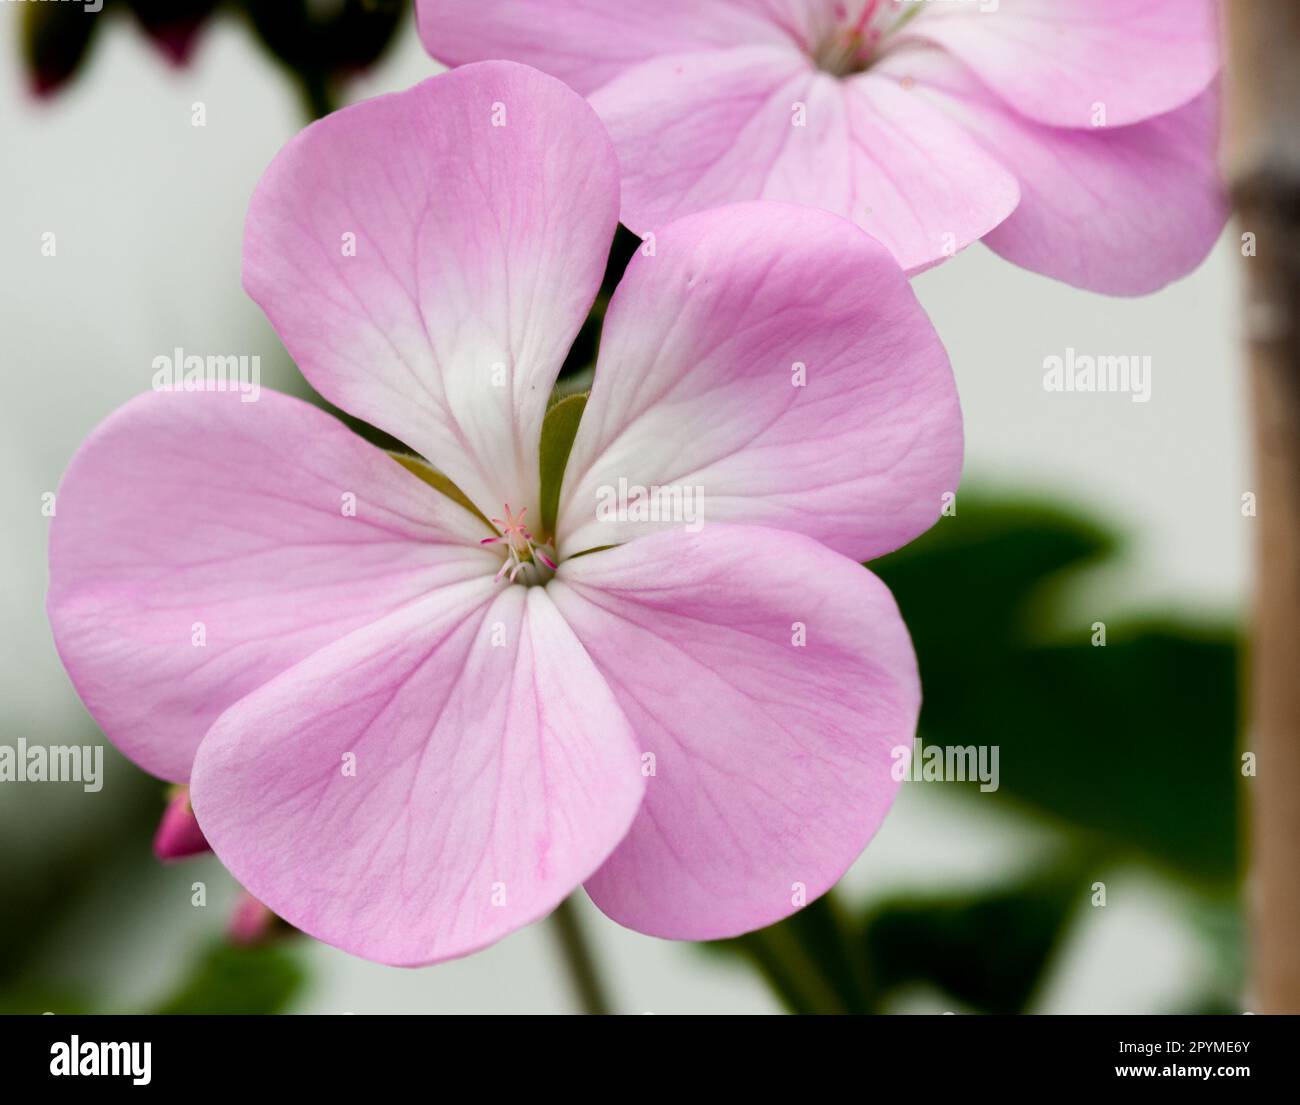 crane's-bill has striking magenta flowers and is a clump-forming perennial. Stock Photo